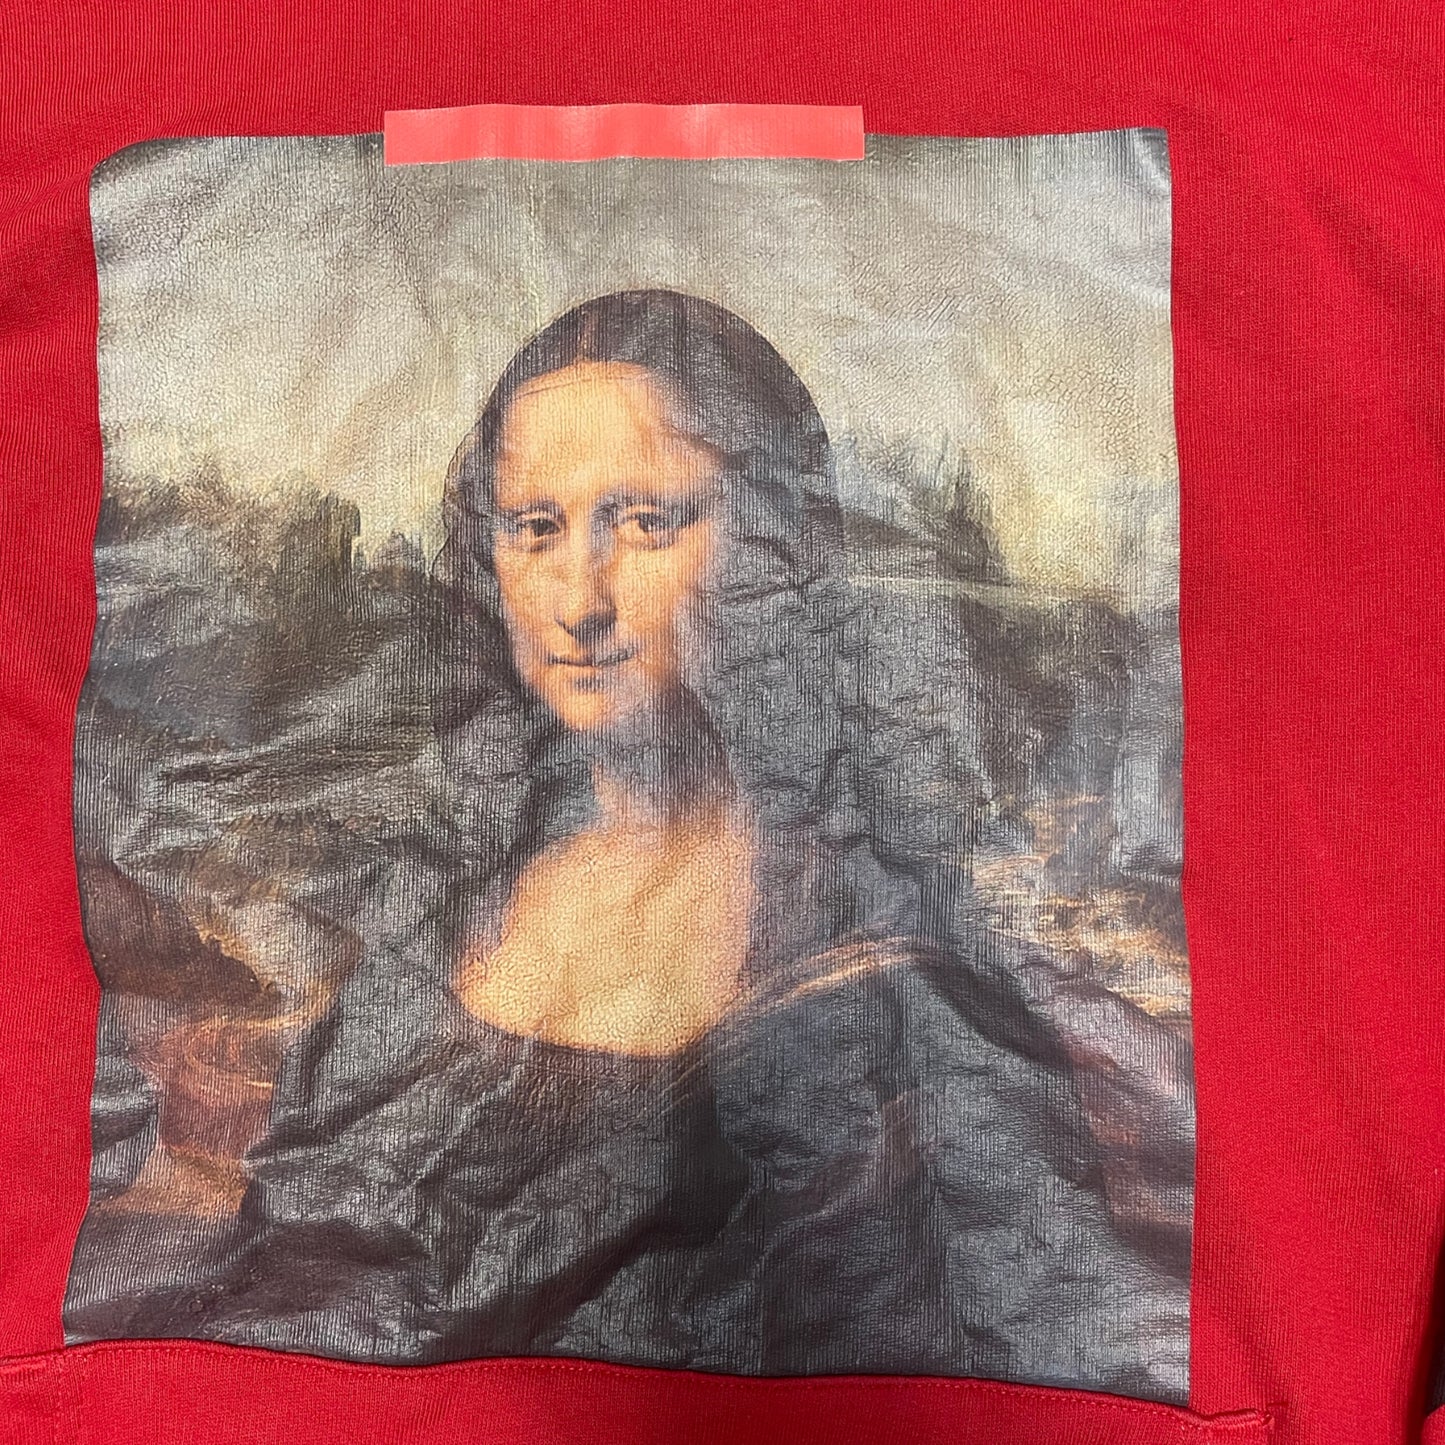 Off-White Mona Lisa Temperature Hoodie Red Size L